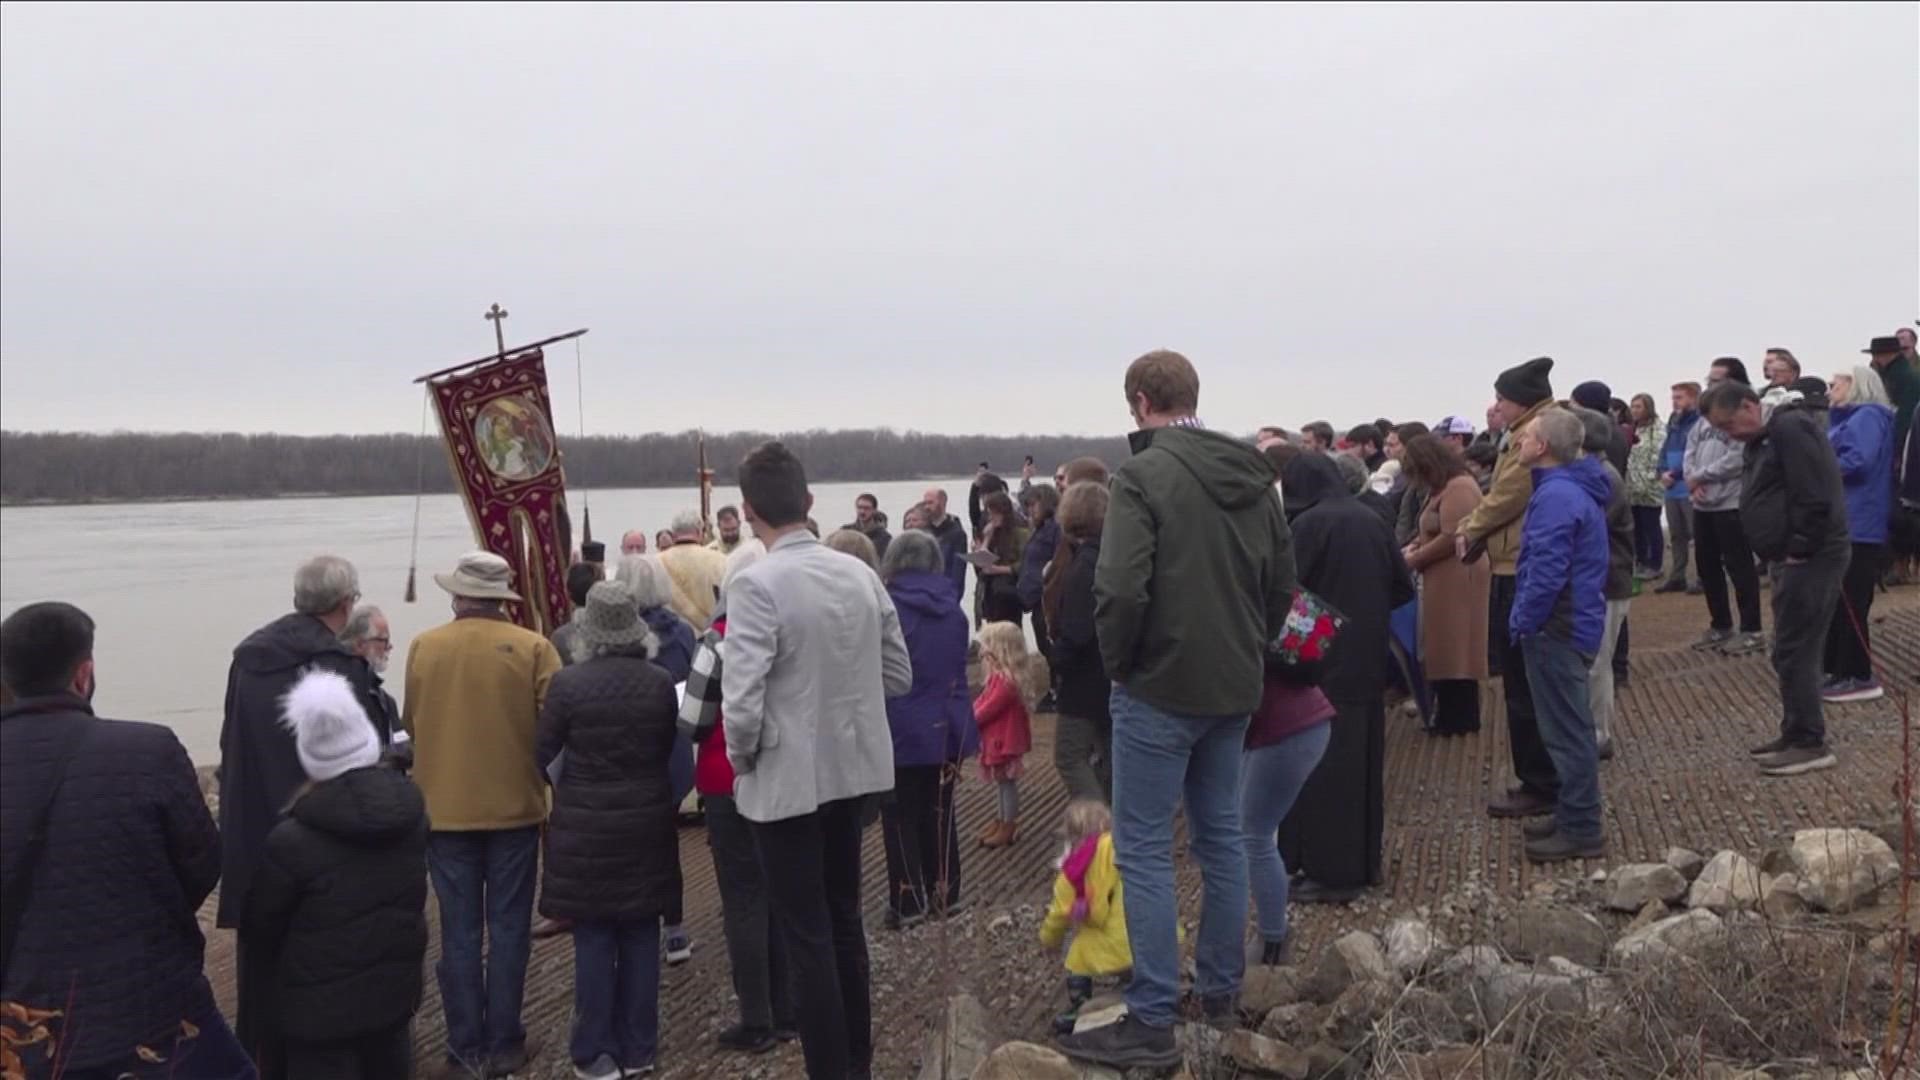 A 2,000-year-old tradition continued at the Boat Landing and Greenbelt Park on Saturday, Jan. 7.